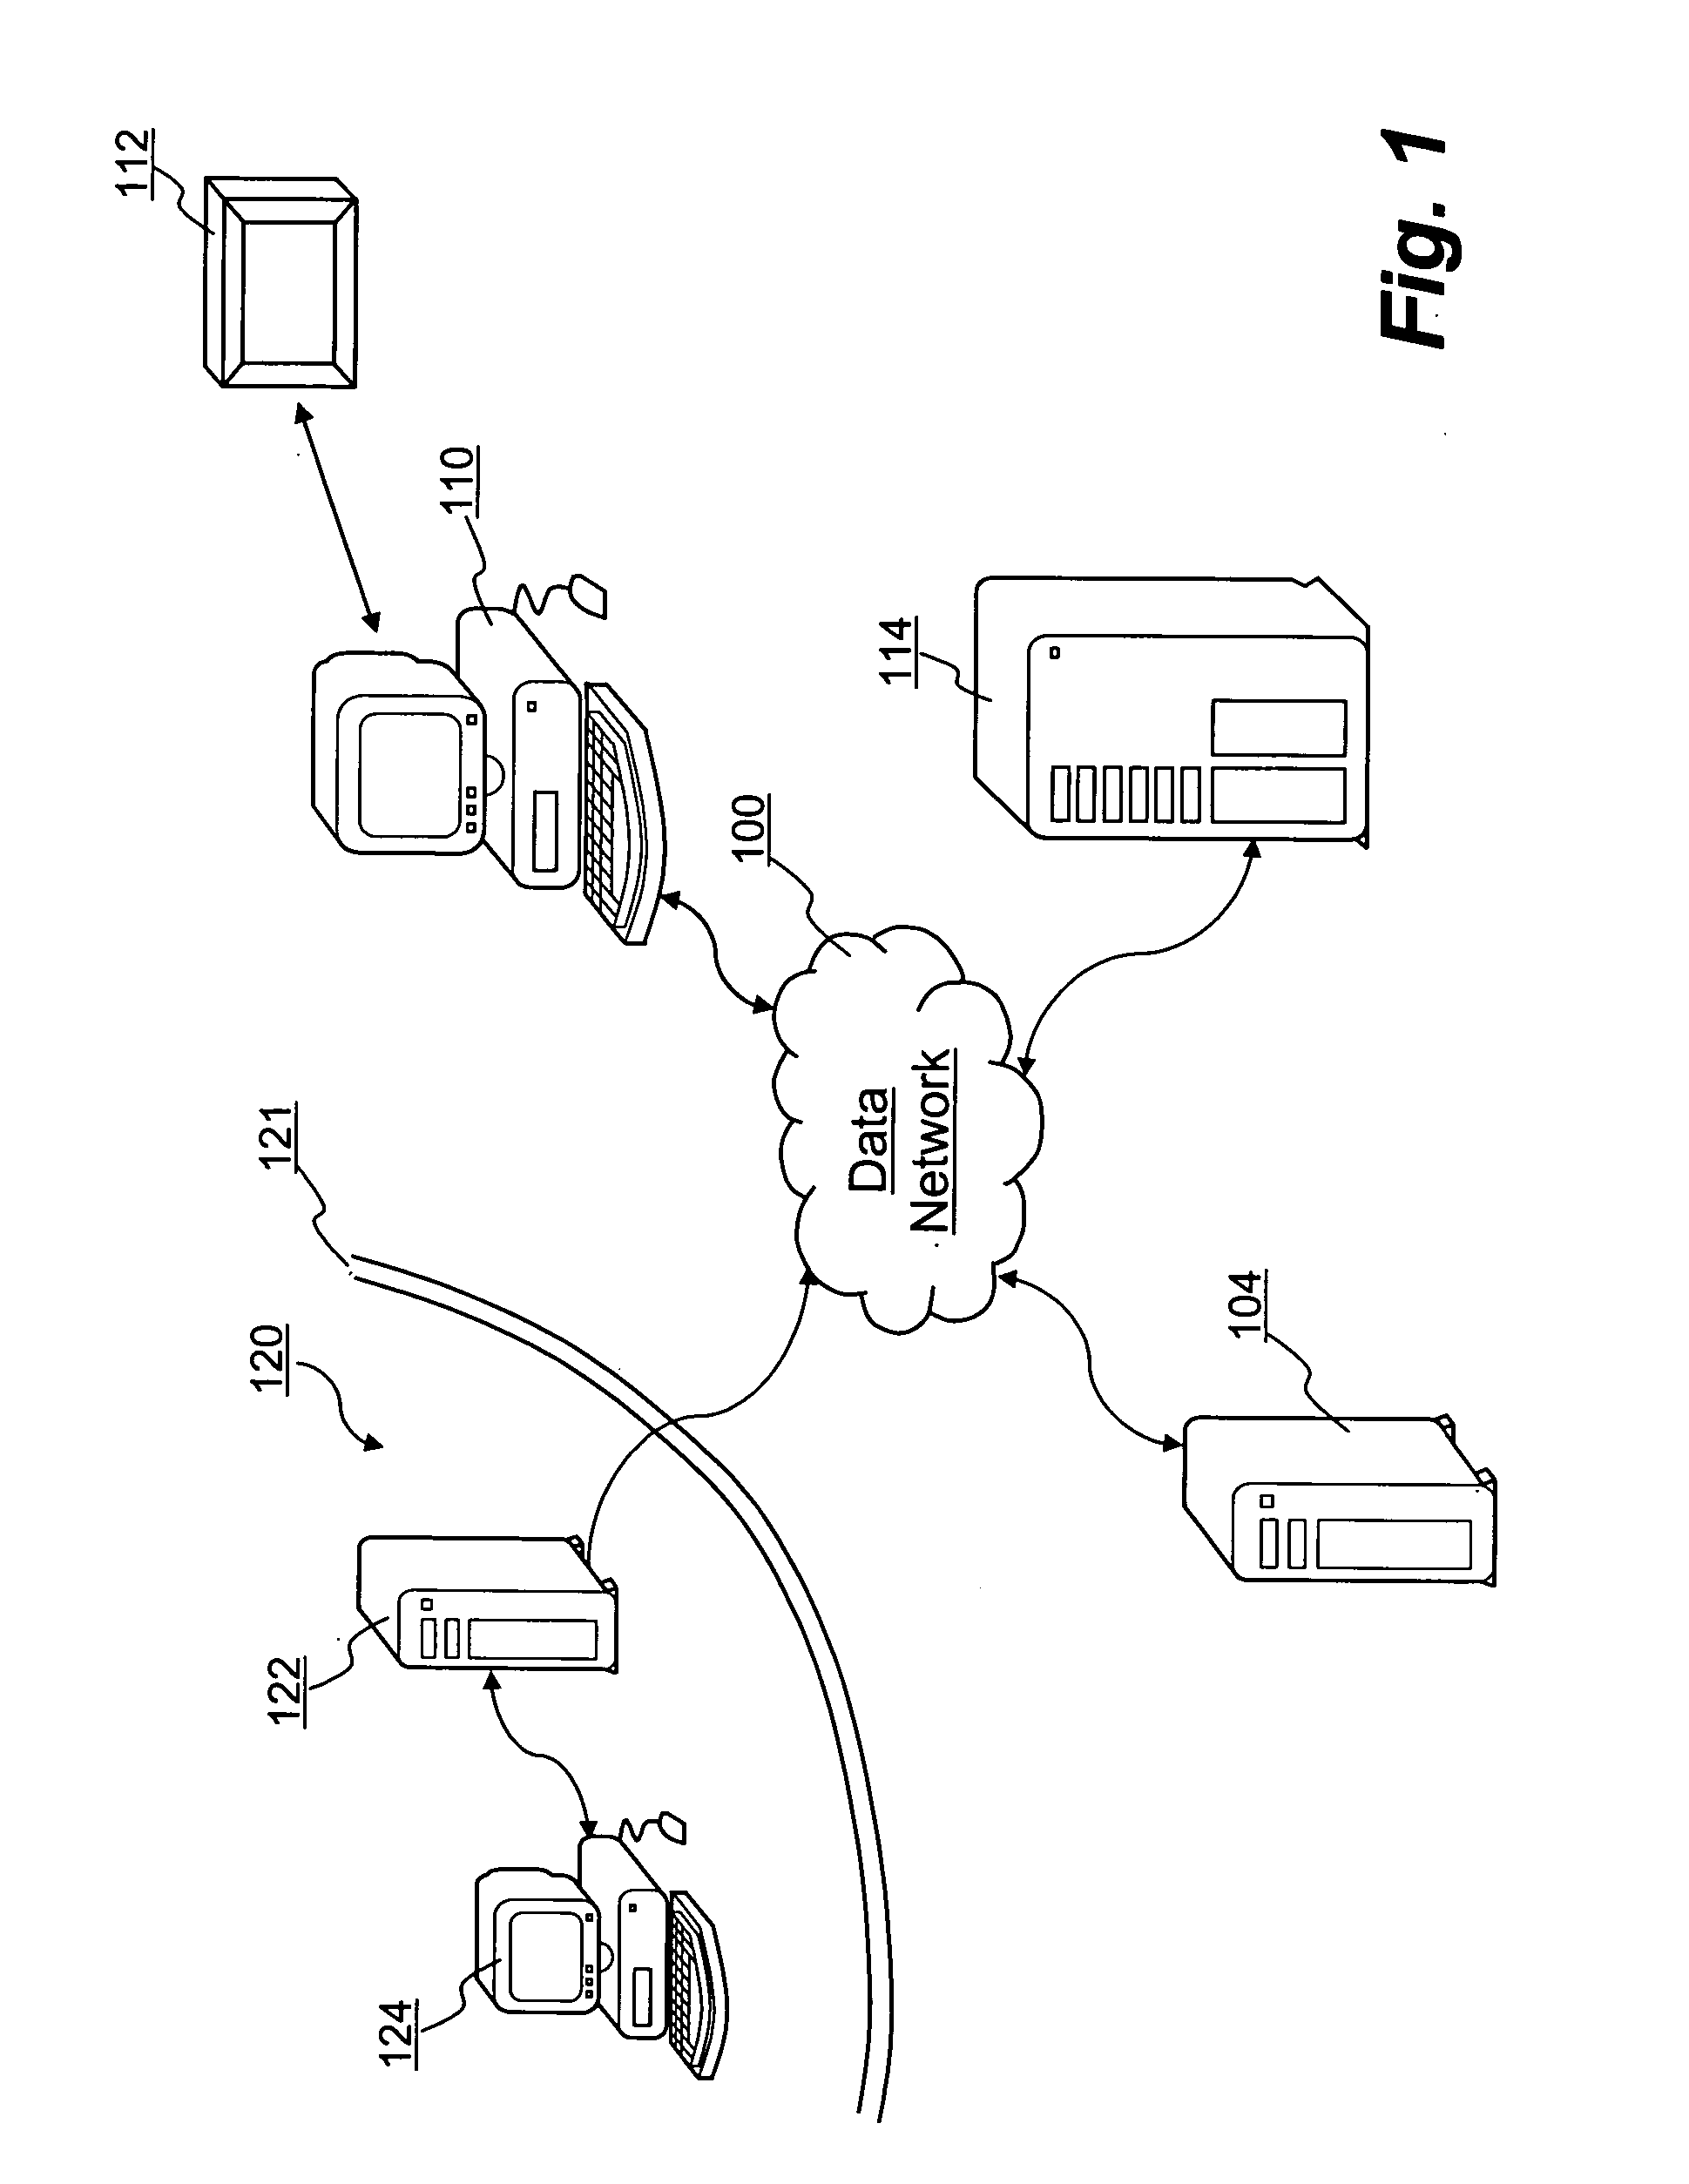 Method and system for data transmission between wearable devices or from wearable devices to portal